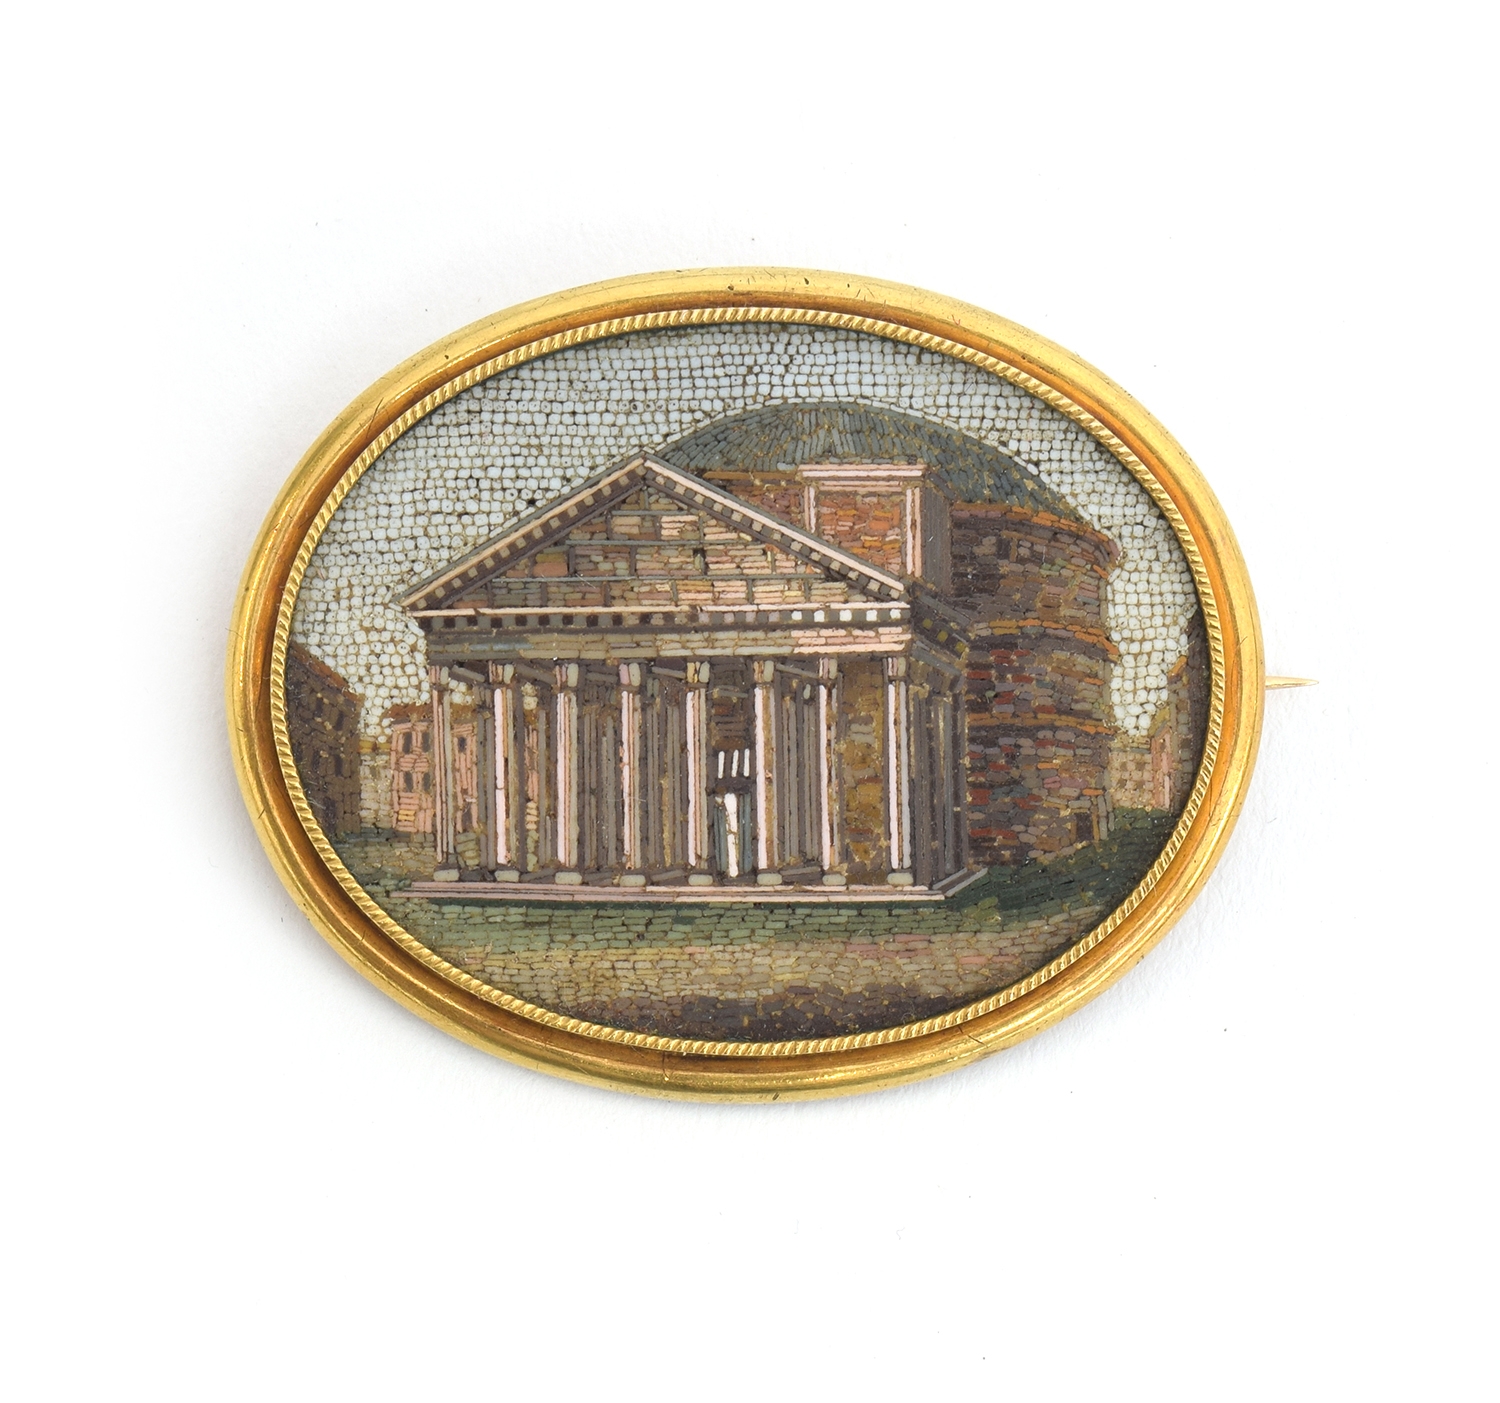 A fine quality Victorian gold mounted micro mosaic brooch depicting The Pantheon, Rome. The gold